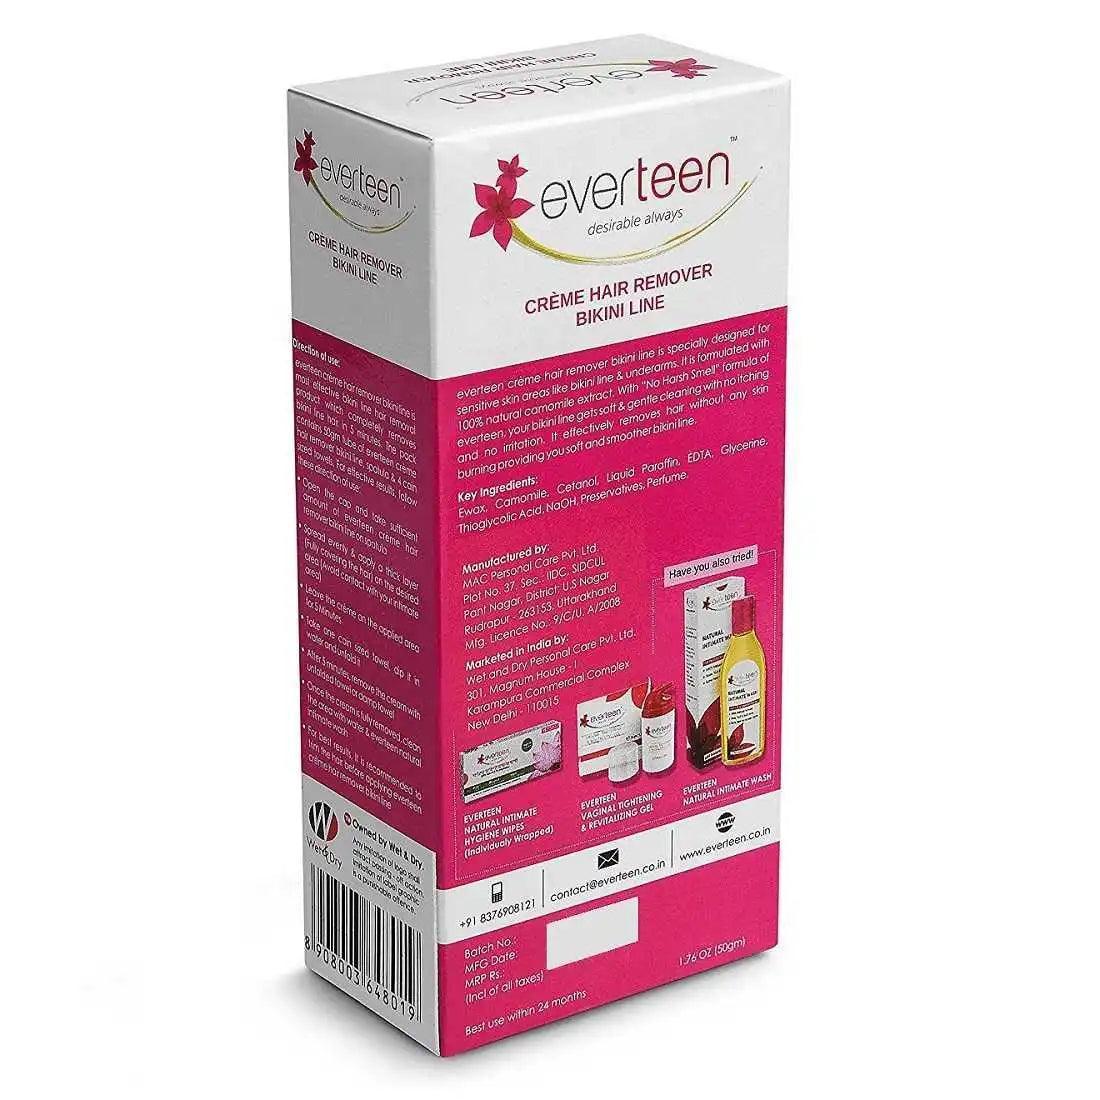 everteen Natural Hair Remover Creme 50g for Bikini Line and Underarms is Shipped Worldwide - everteen-neud.com